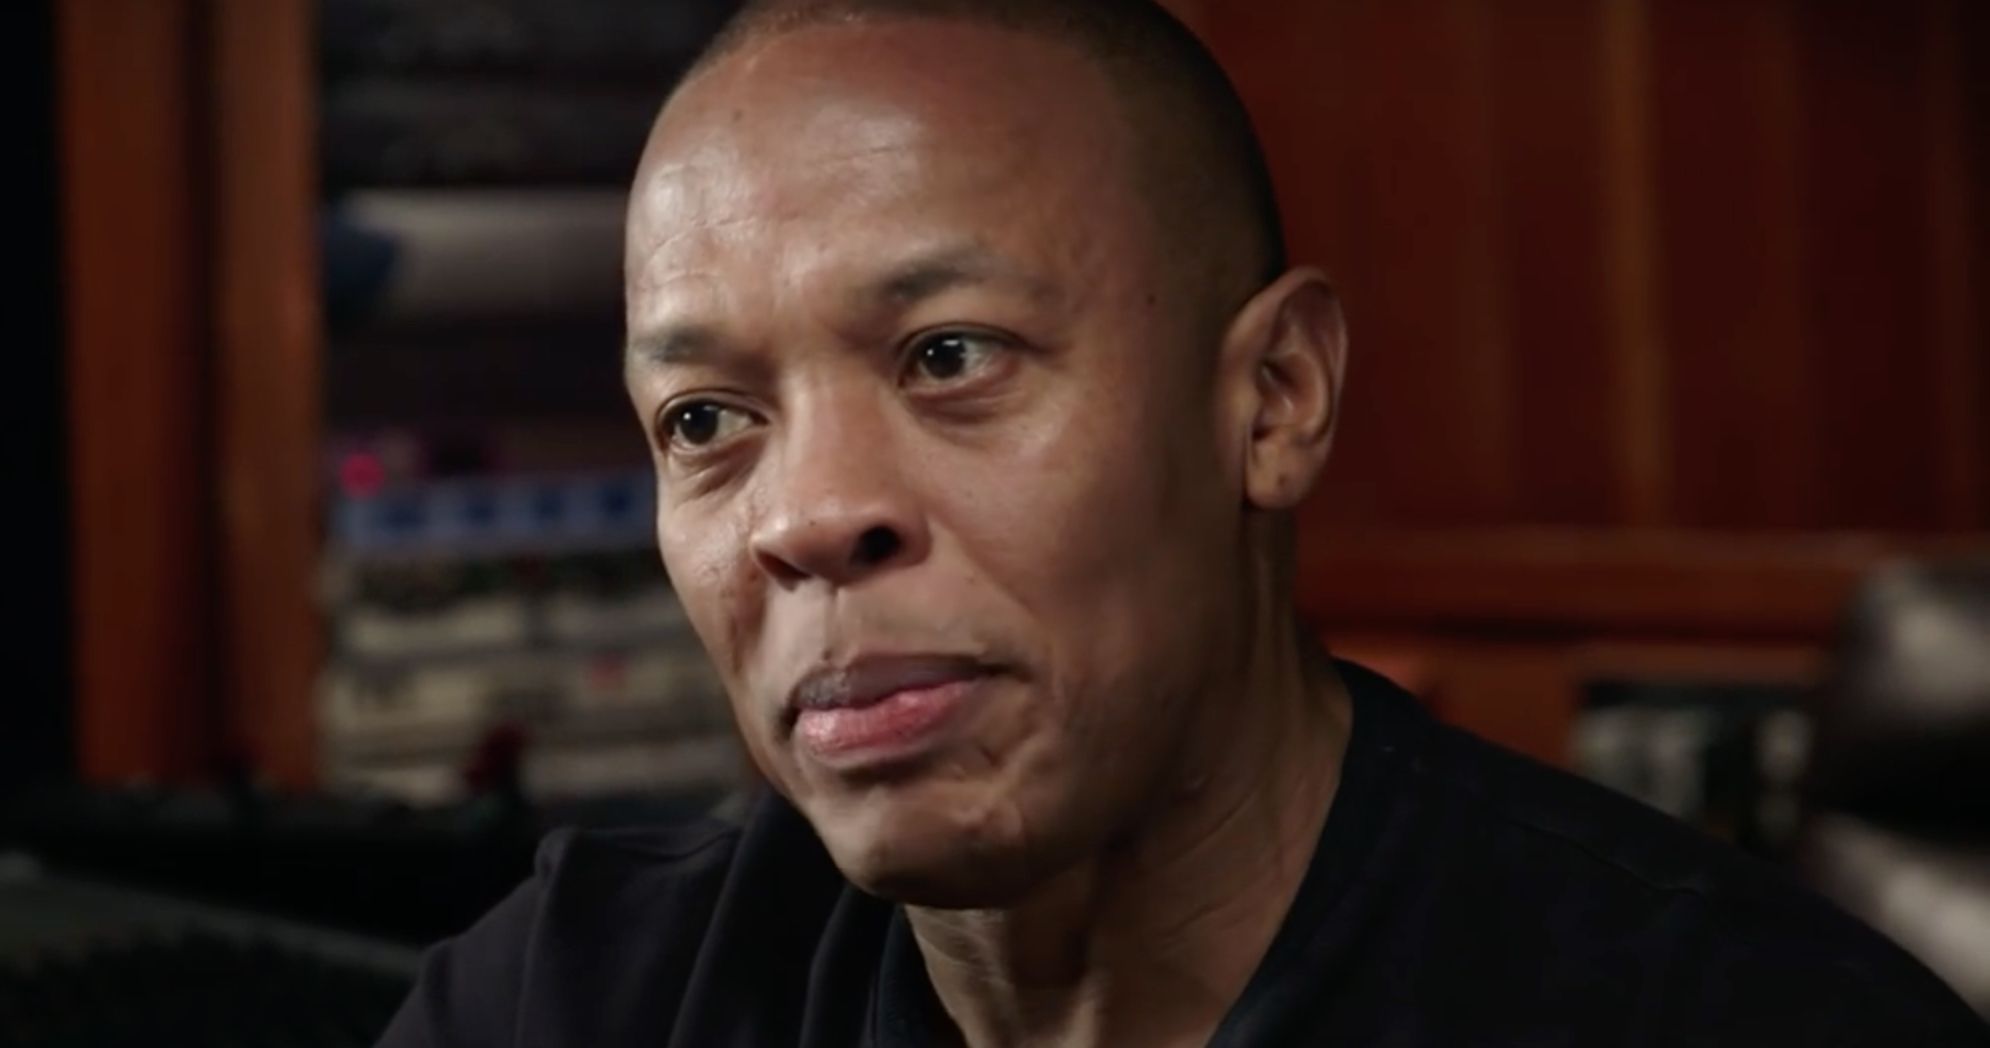 Dr. Dre Rushed to ICU After Suffering a Brain Aneurysm